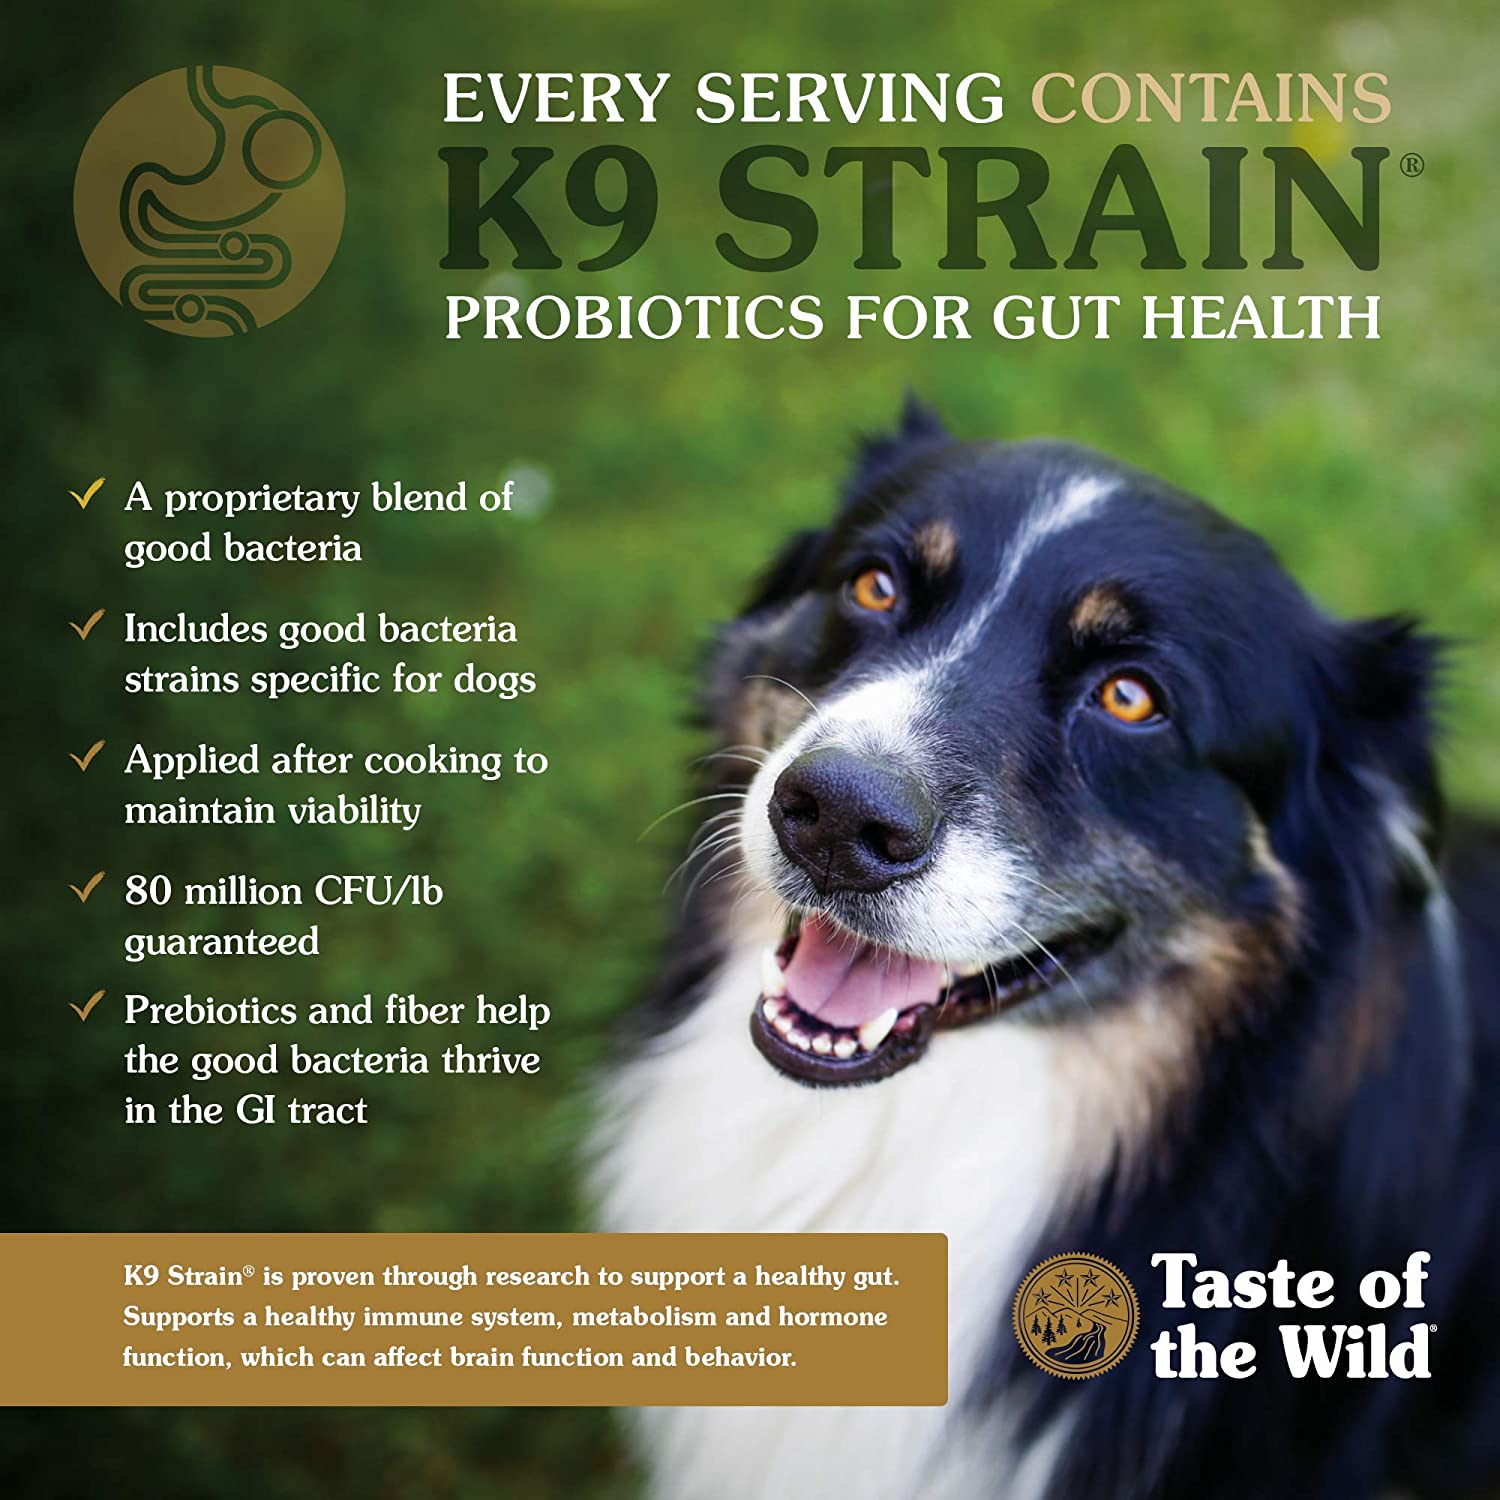 Taste Of The Wild Puppy Food Pacific Stream  Dog Food  | PetMax Canada